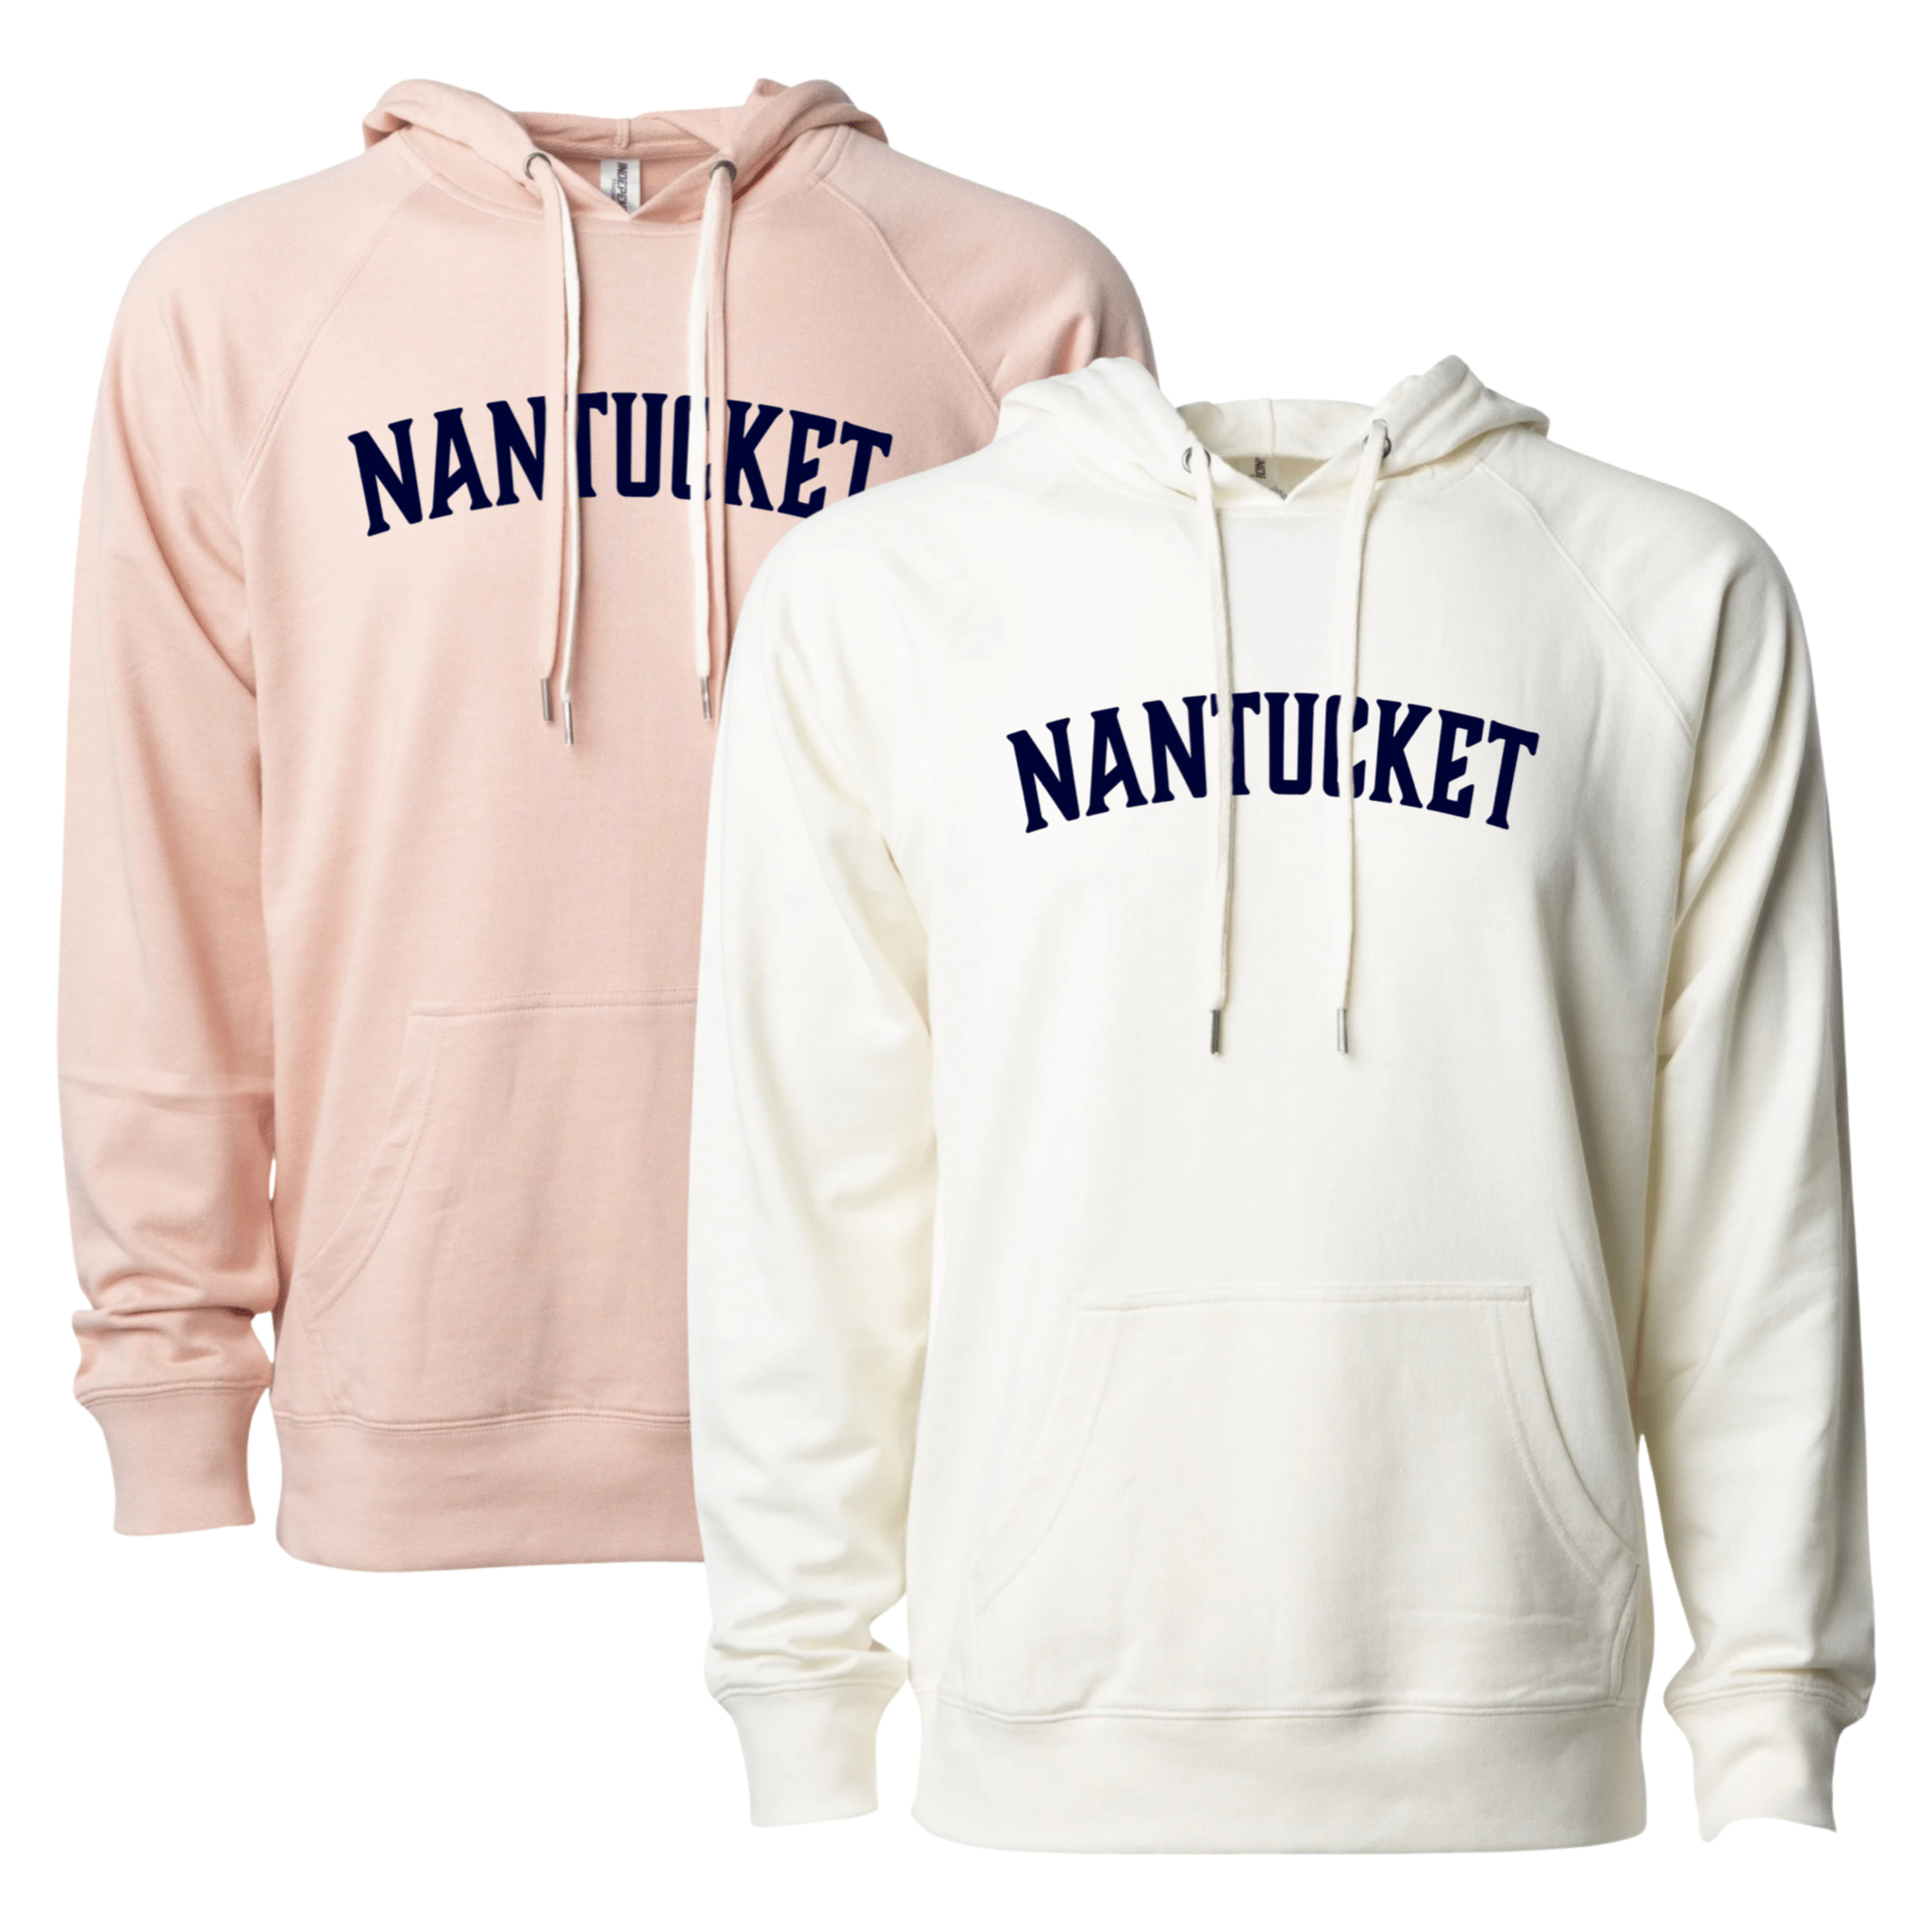 Nantucket French Terry Hooded Pullover